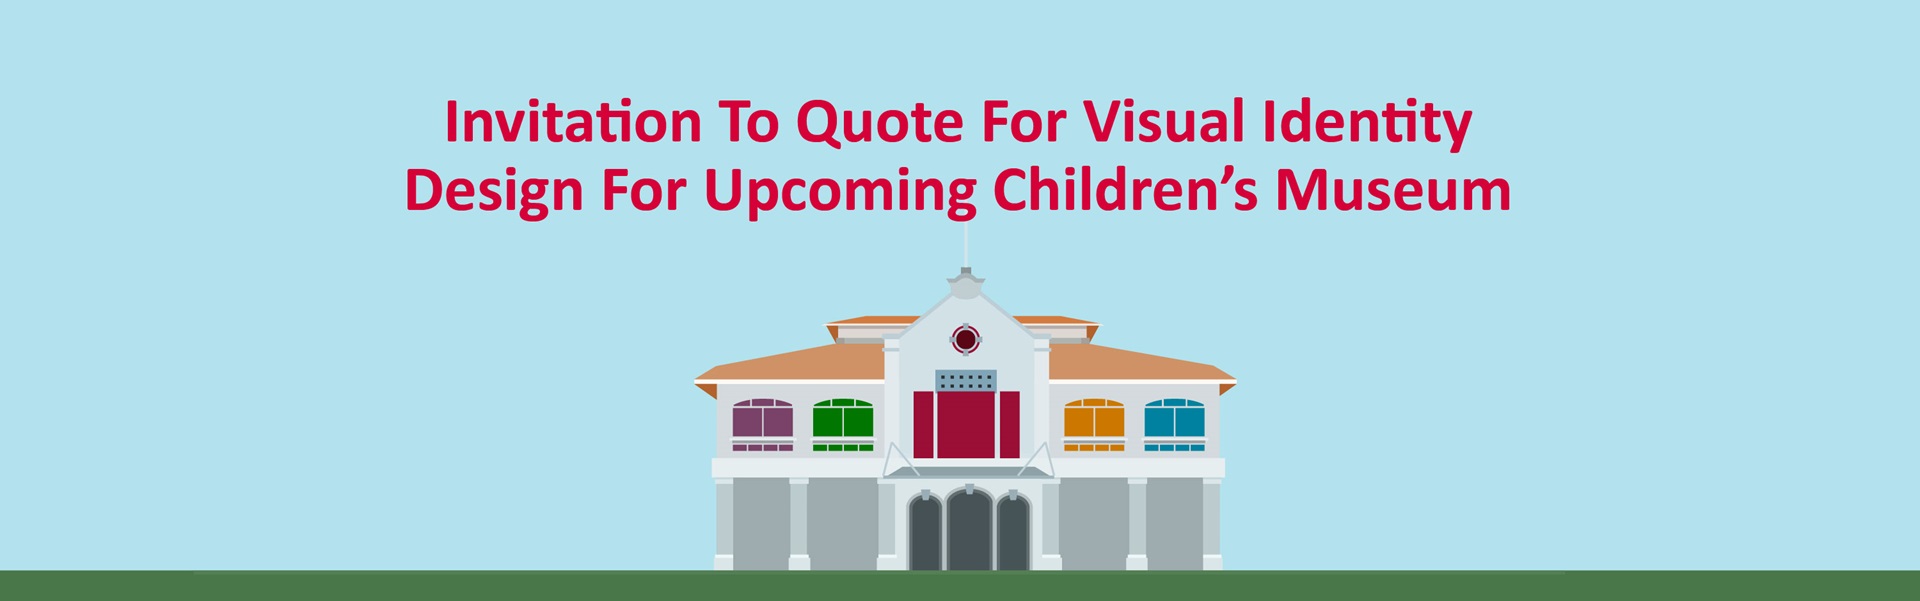 Invitation to Quote for Visual Identity Design for Upcoming Children's Museum